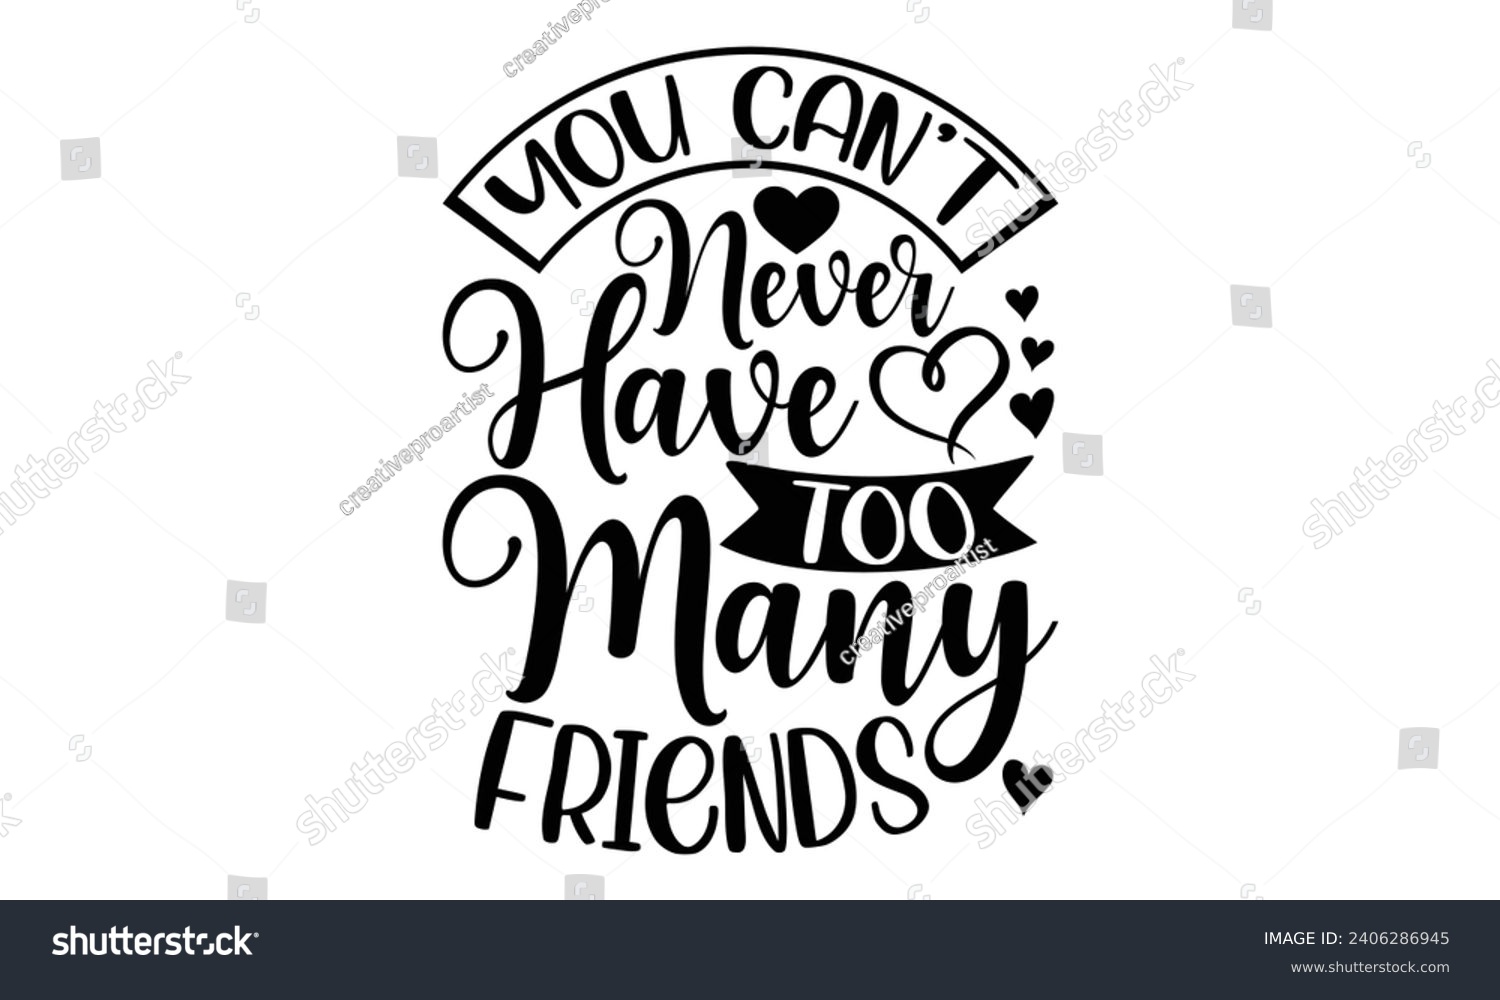 SVG of You Can't Never Have Too Many Friends- Best friends t- shirt design, Hand drawn vintage illustration with hand-lettering and decoration elements, greeting card template with typography text svg